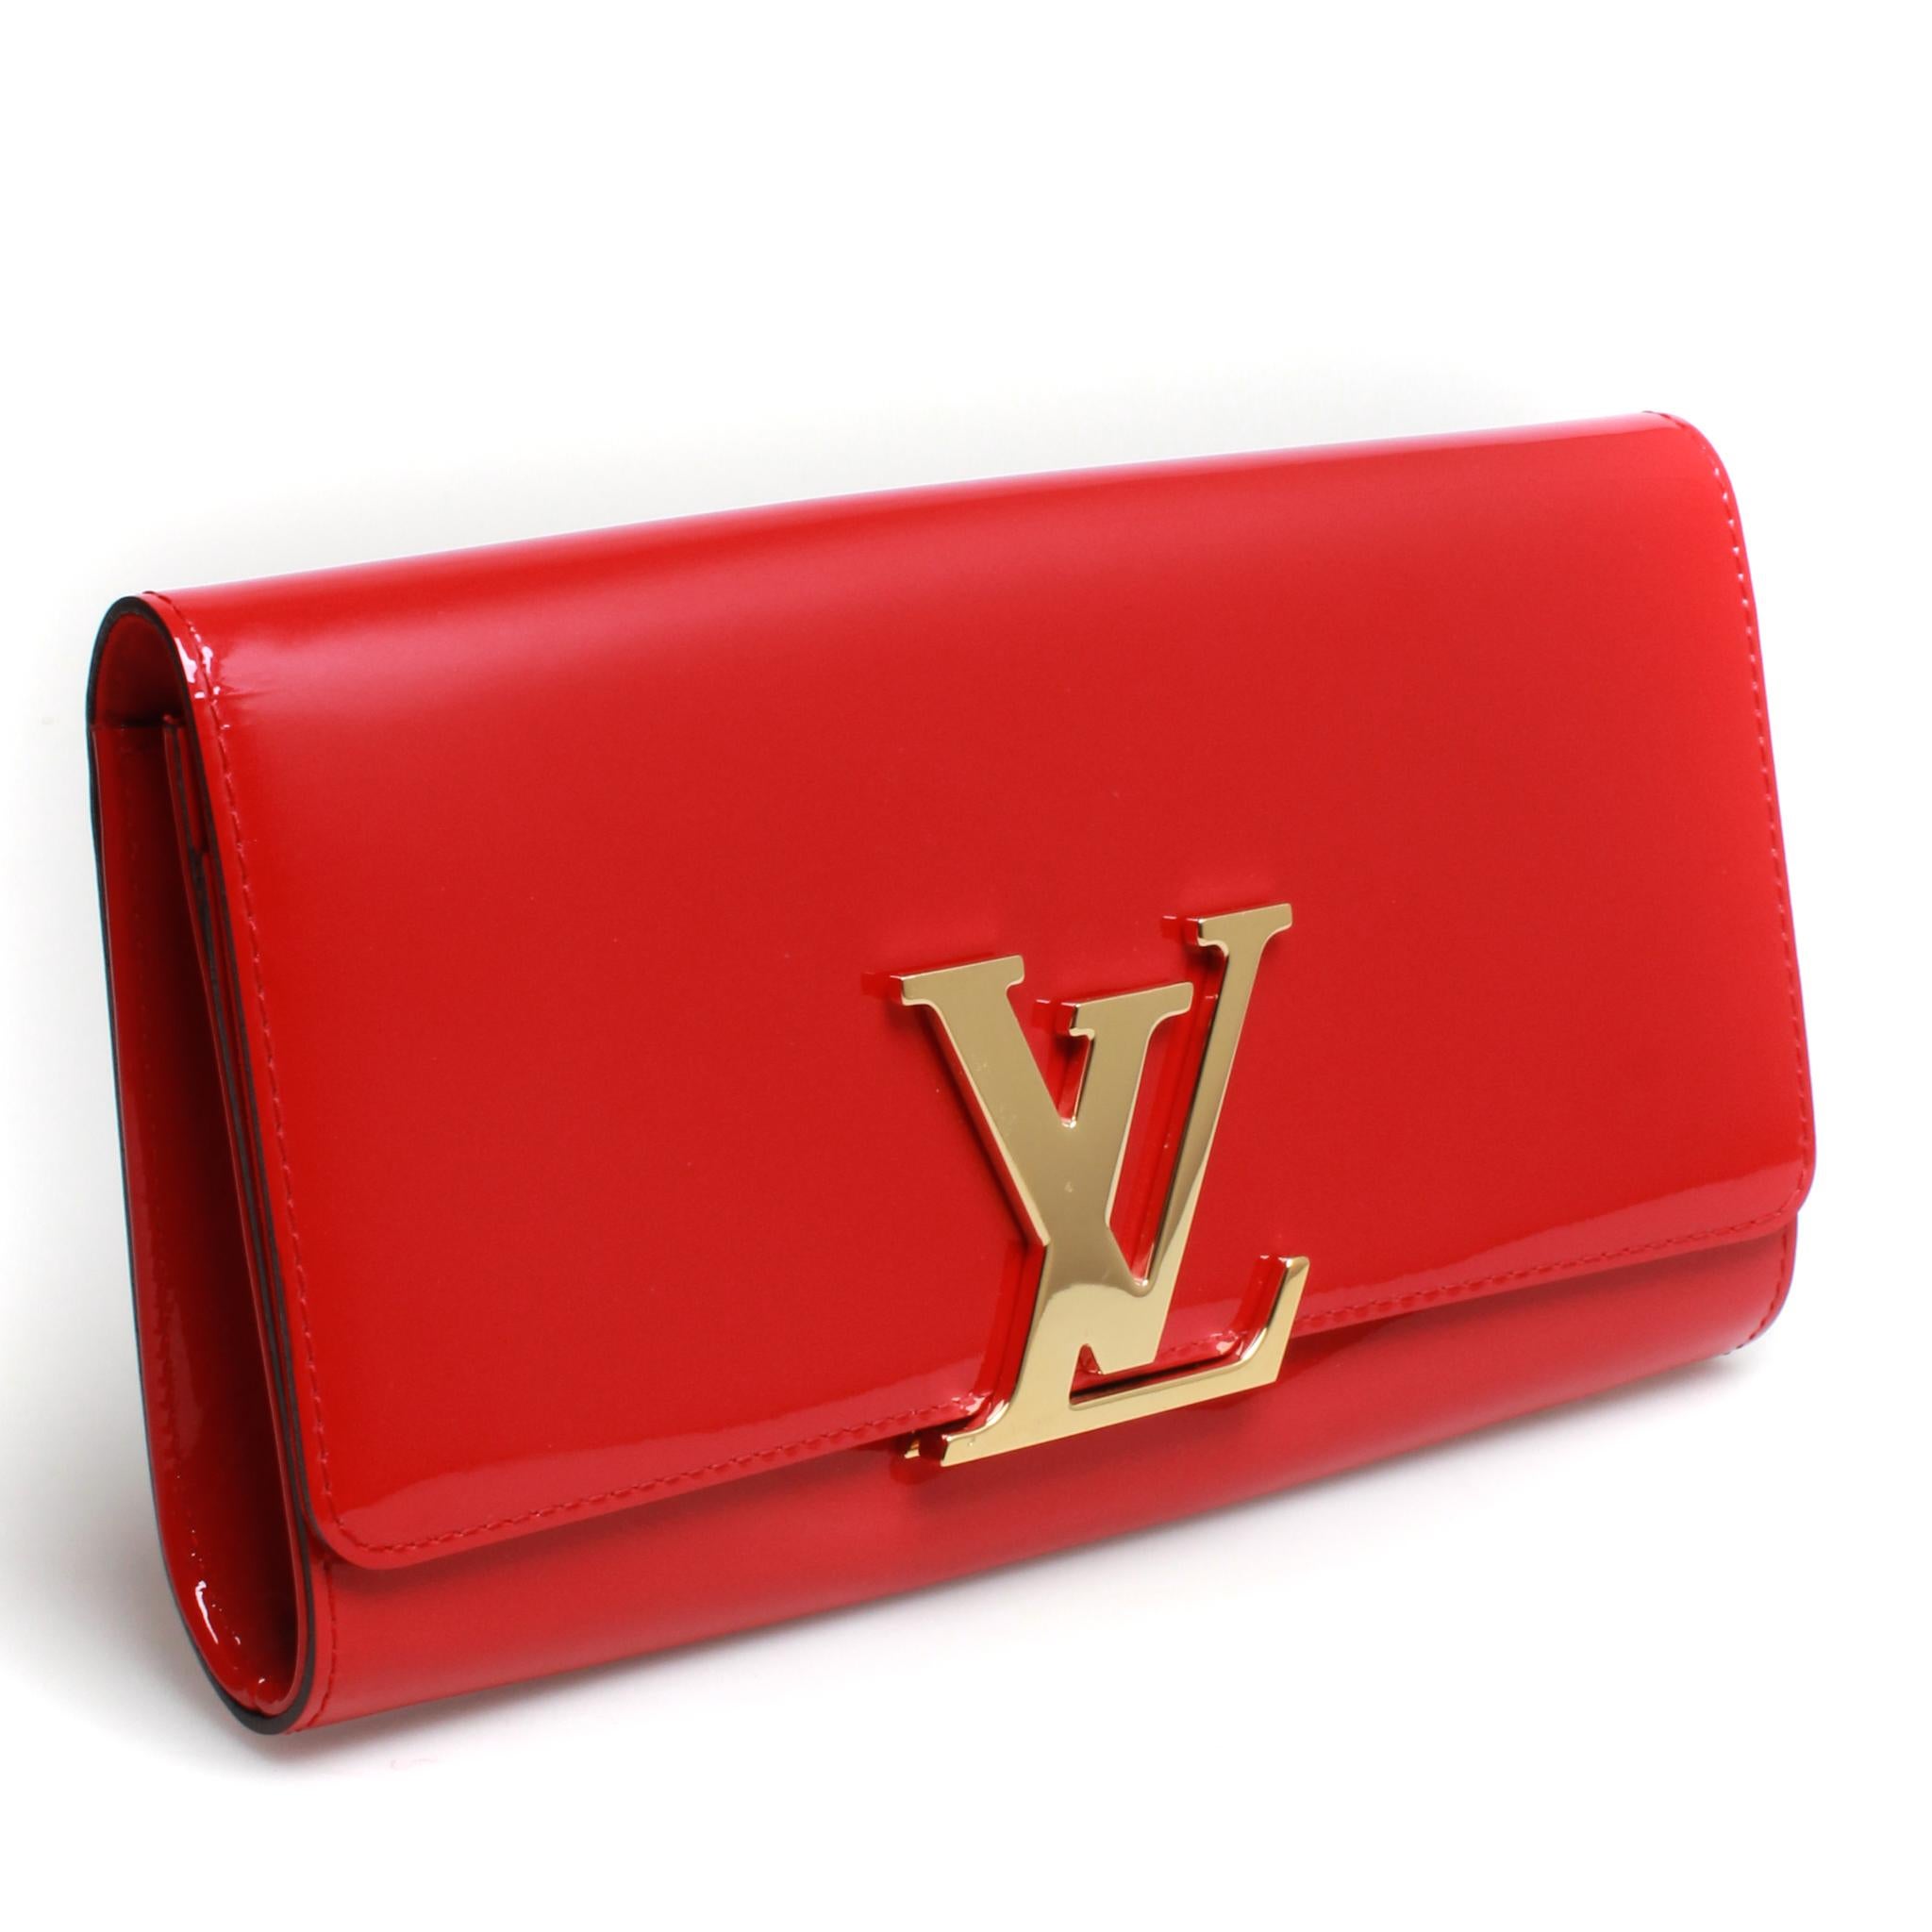 Louis Vuitton rouge vernis leather Louise clutch with front flap and brass hardware detailing.
Original dust bag and box.
